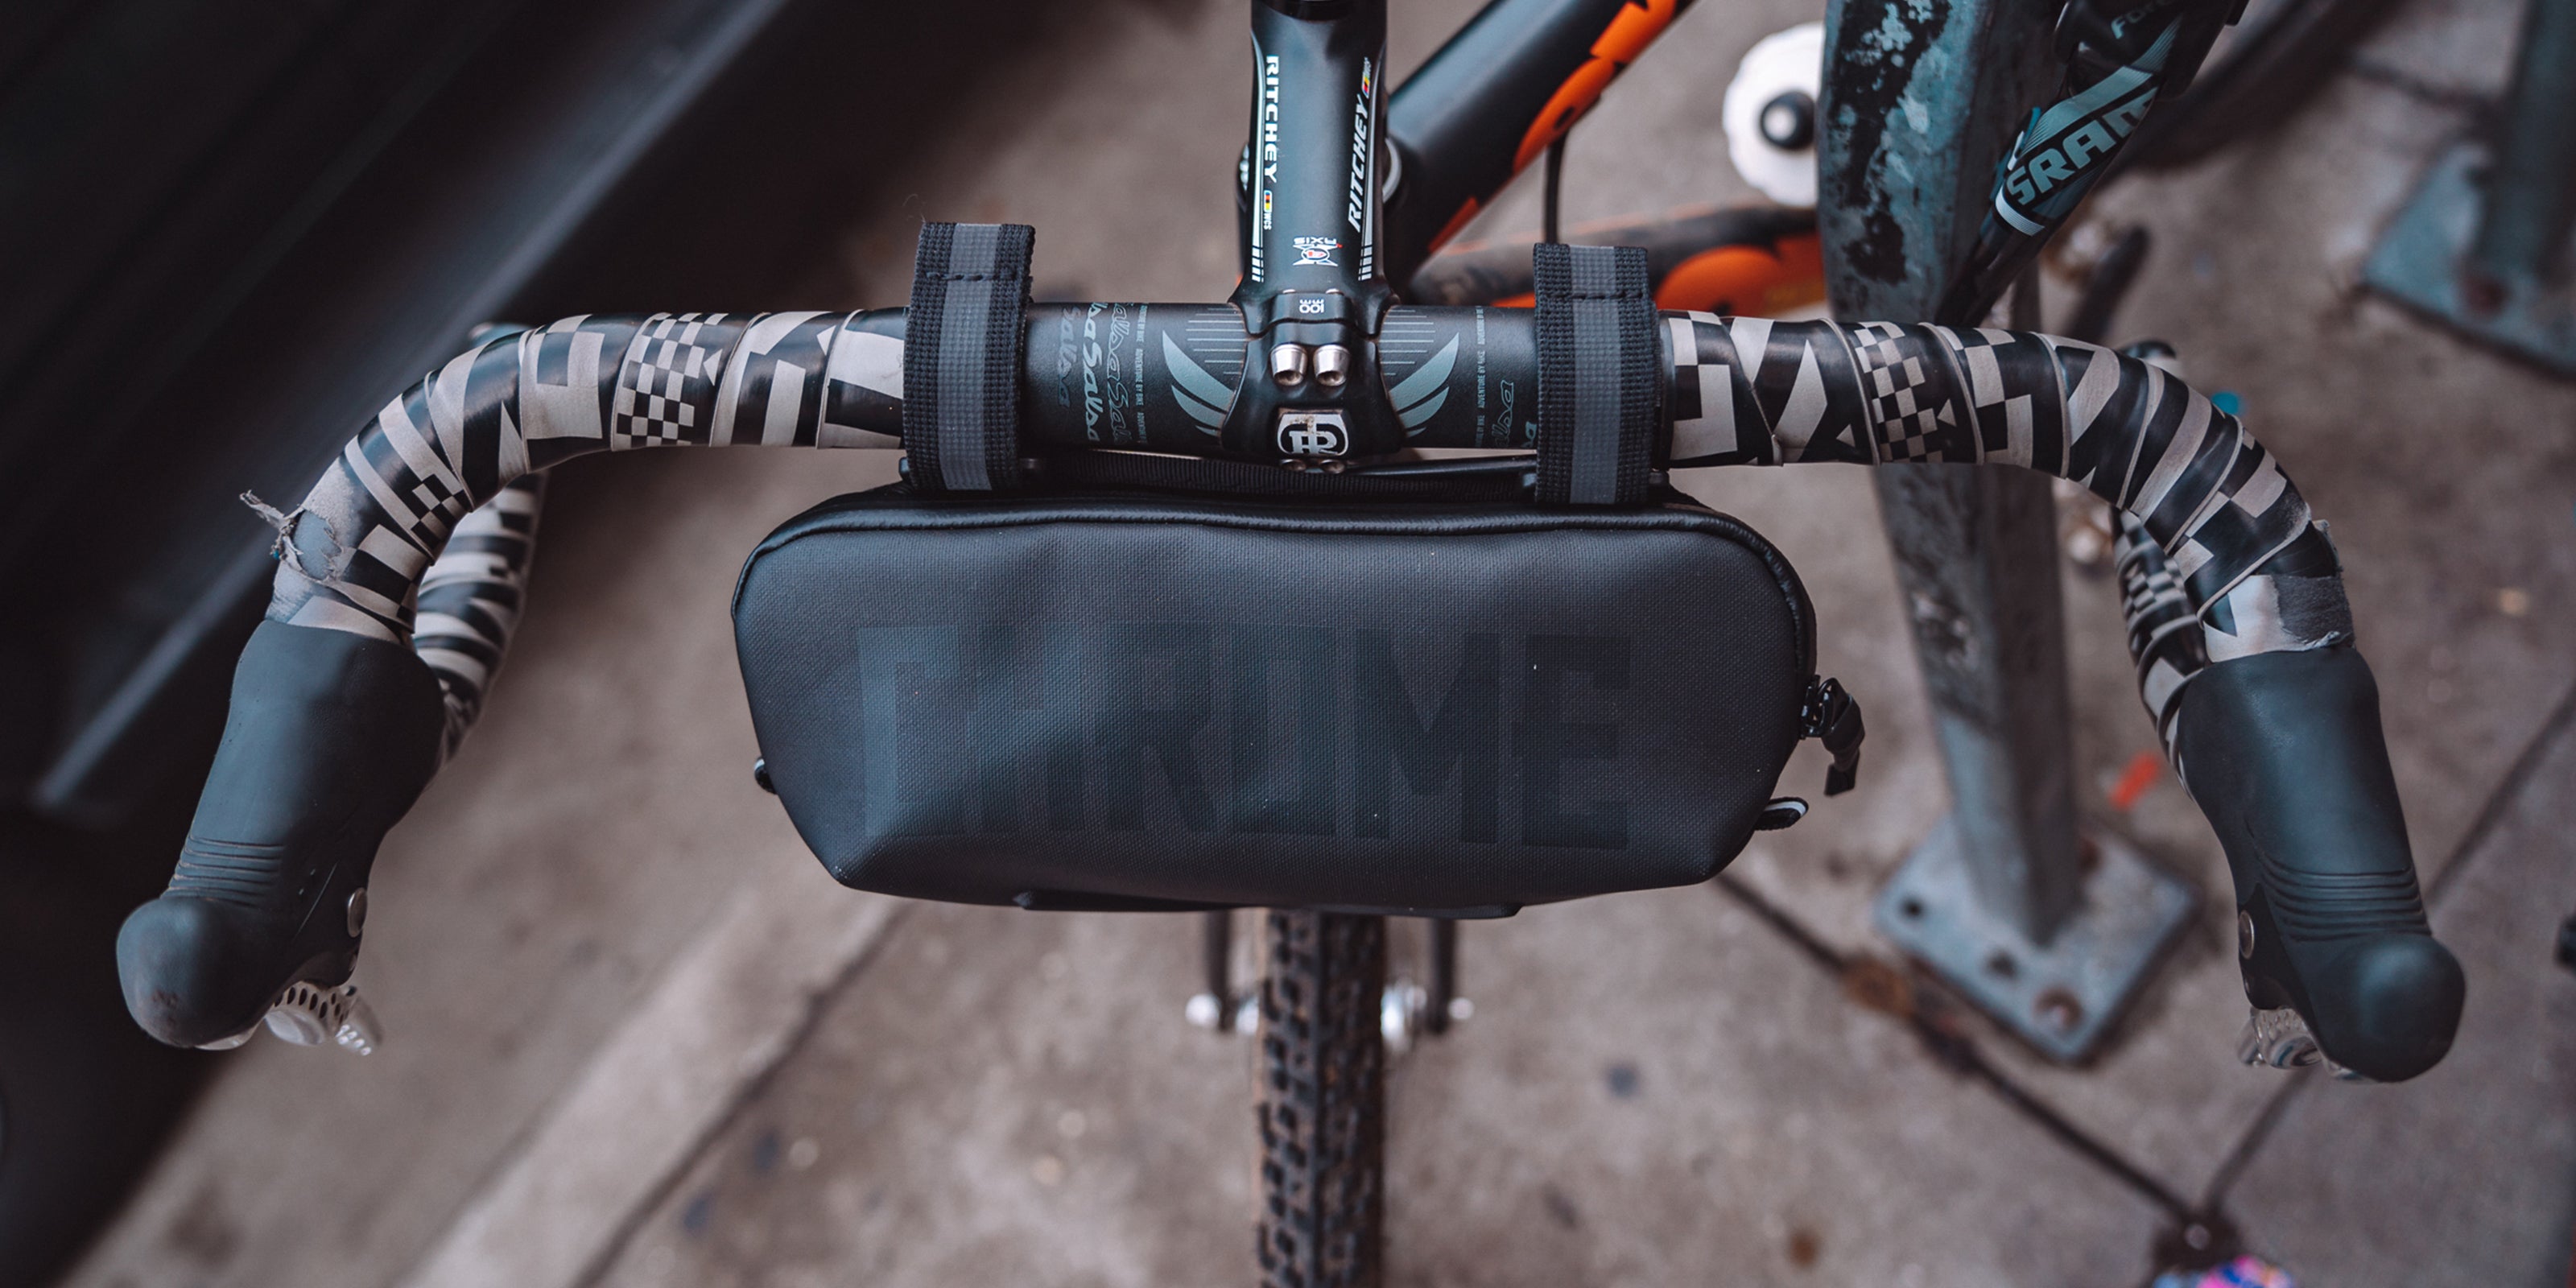 Helix handlebar bag from the top down on a bike desktop size image